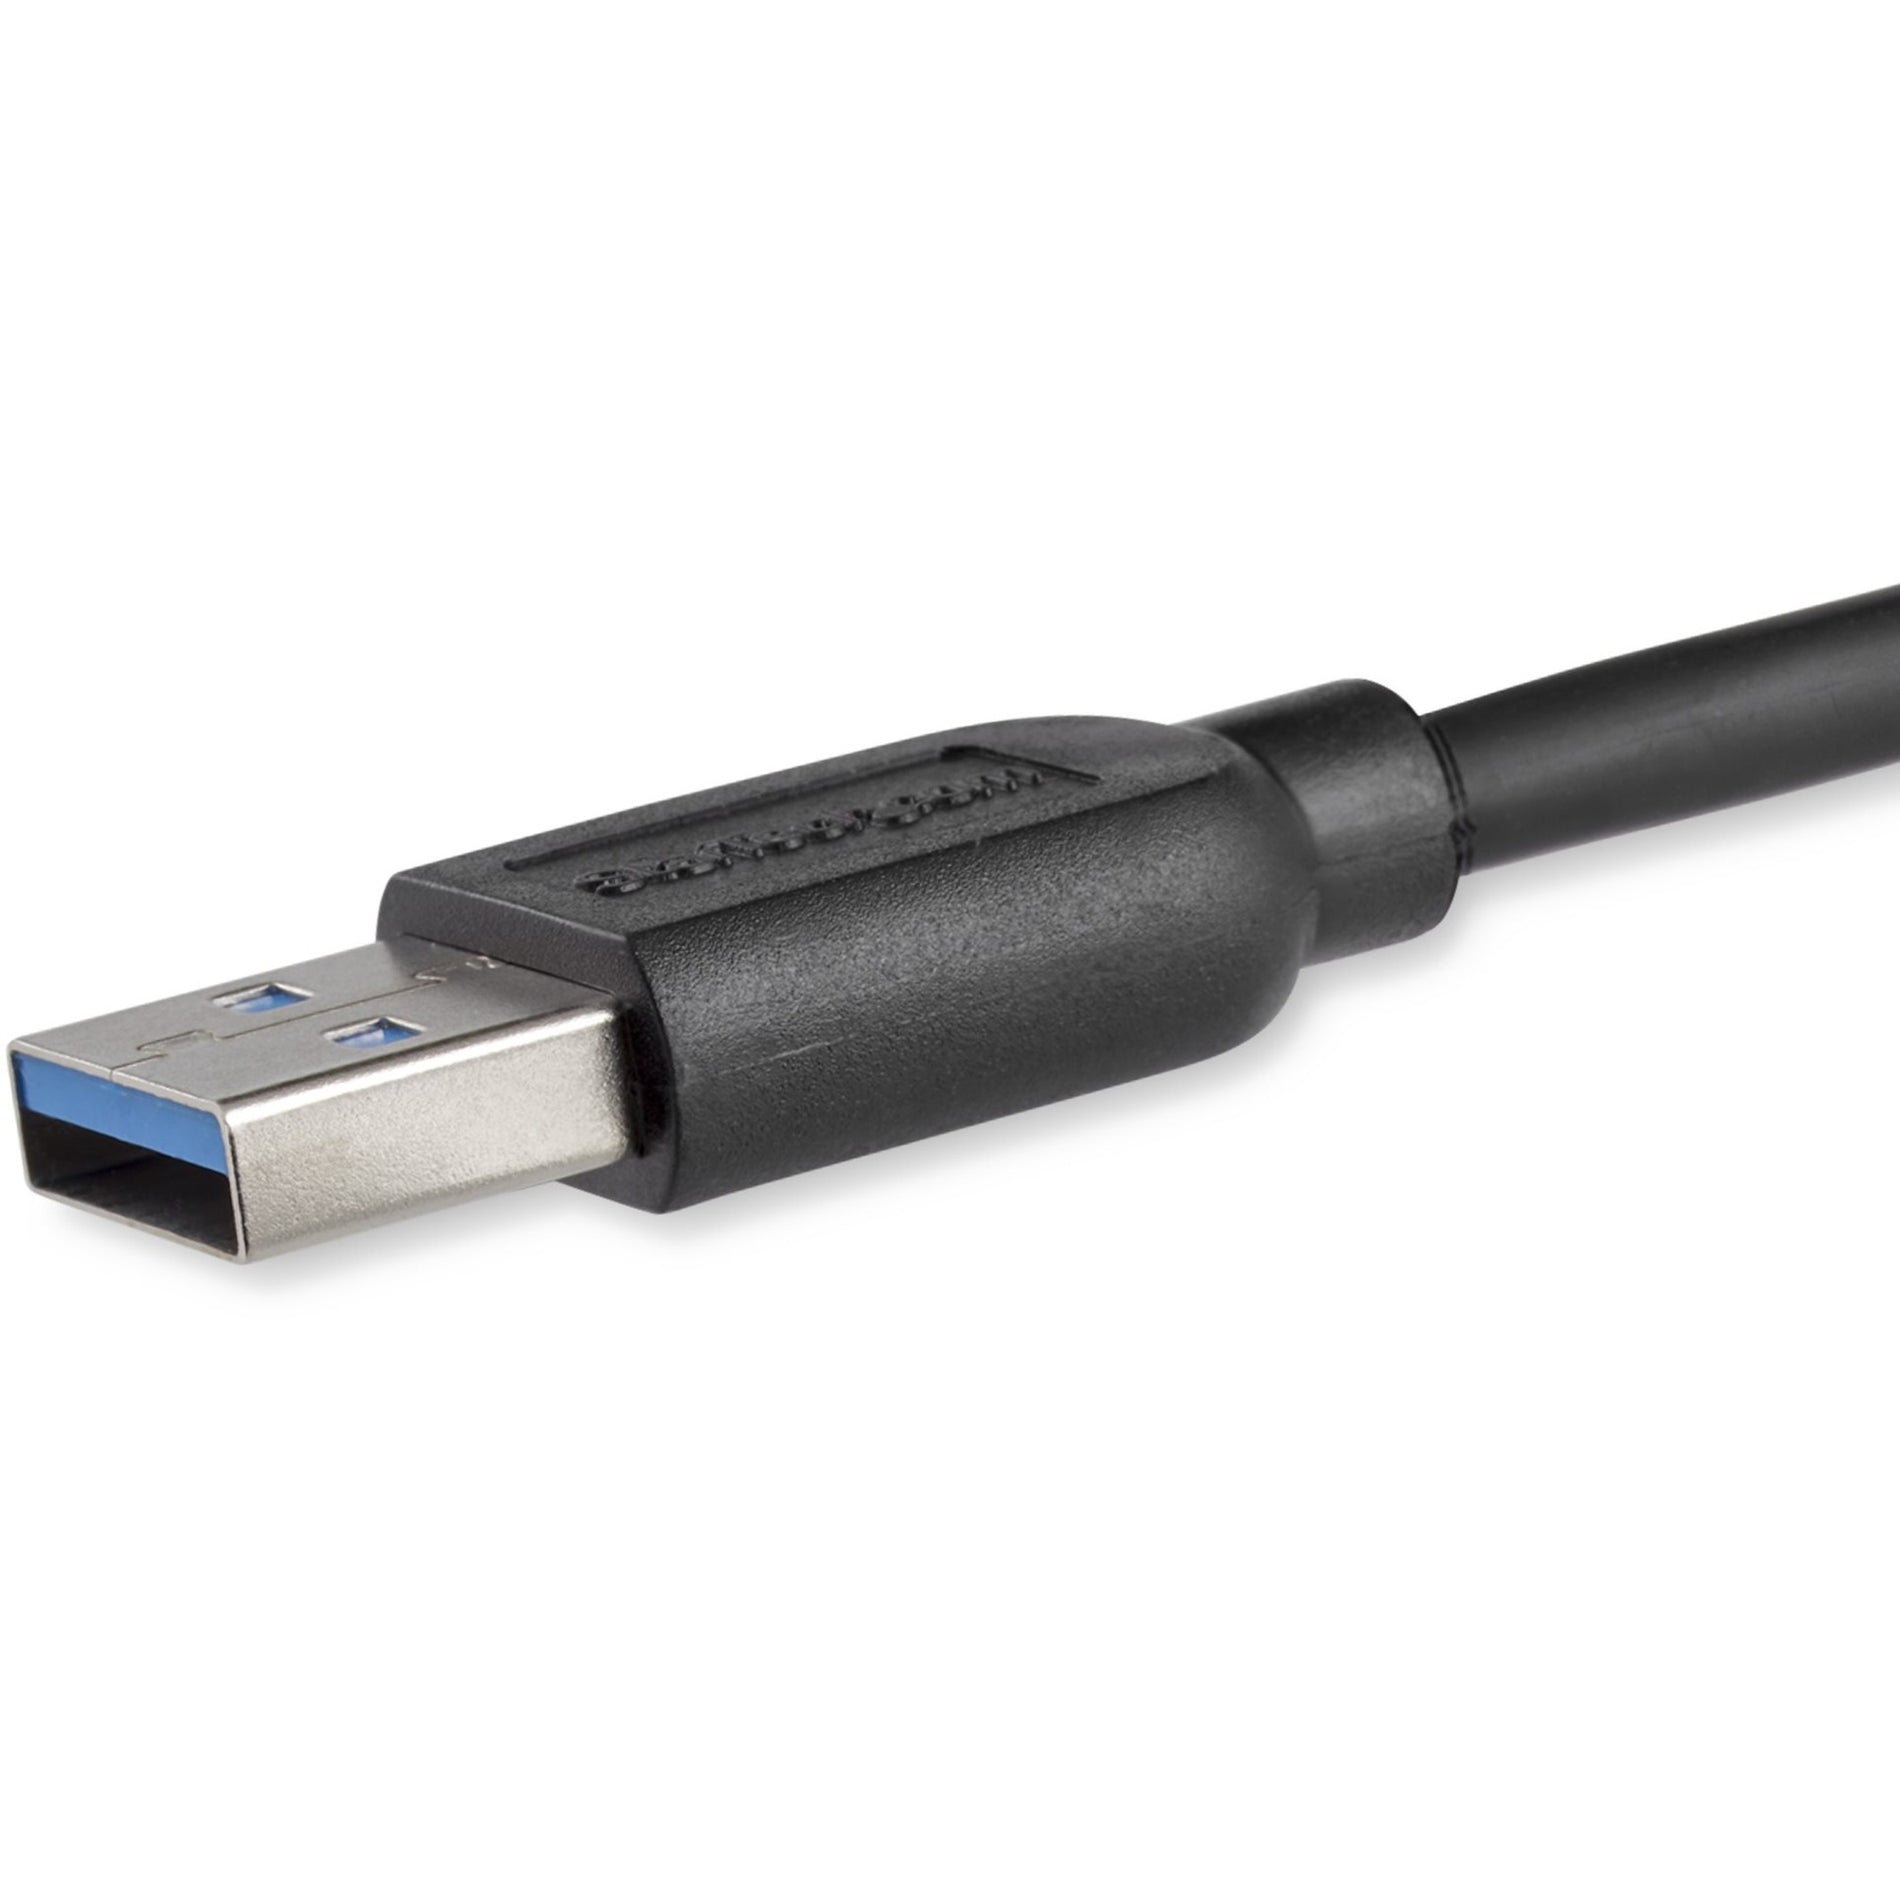 StarTech.com USB3AUB2MS 2m (6ft) Slim SuperSpeed USB 3.0 A to Micro B Cable - M/M, Fast Data Transfer, Flexible and Durable